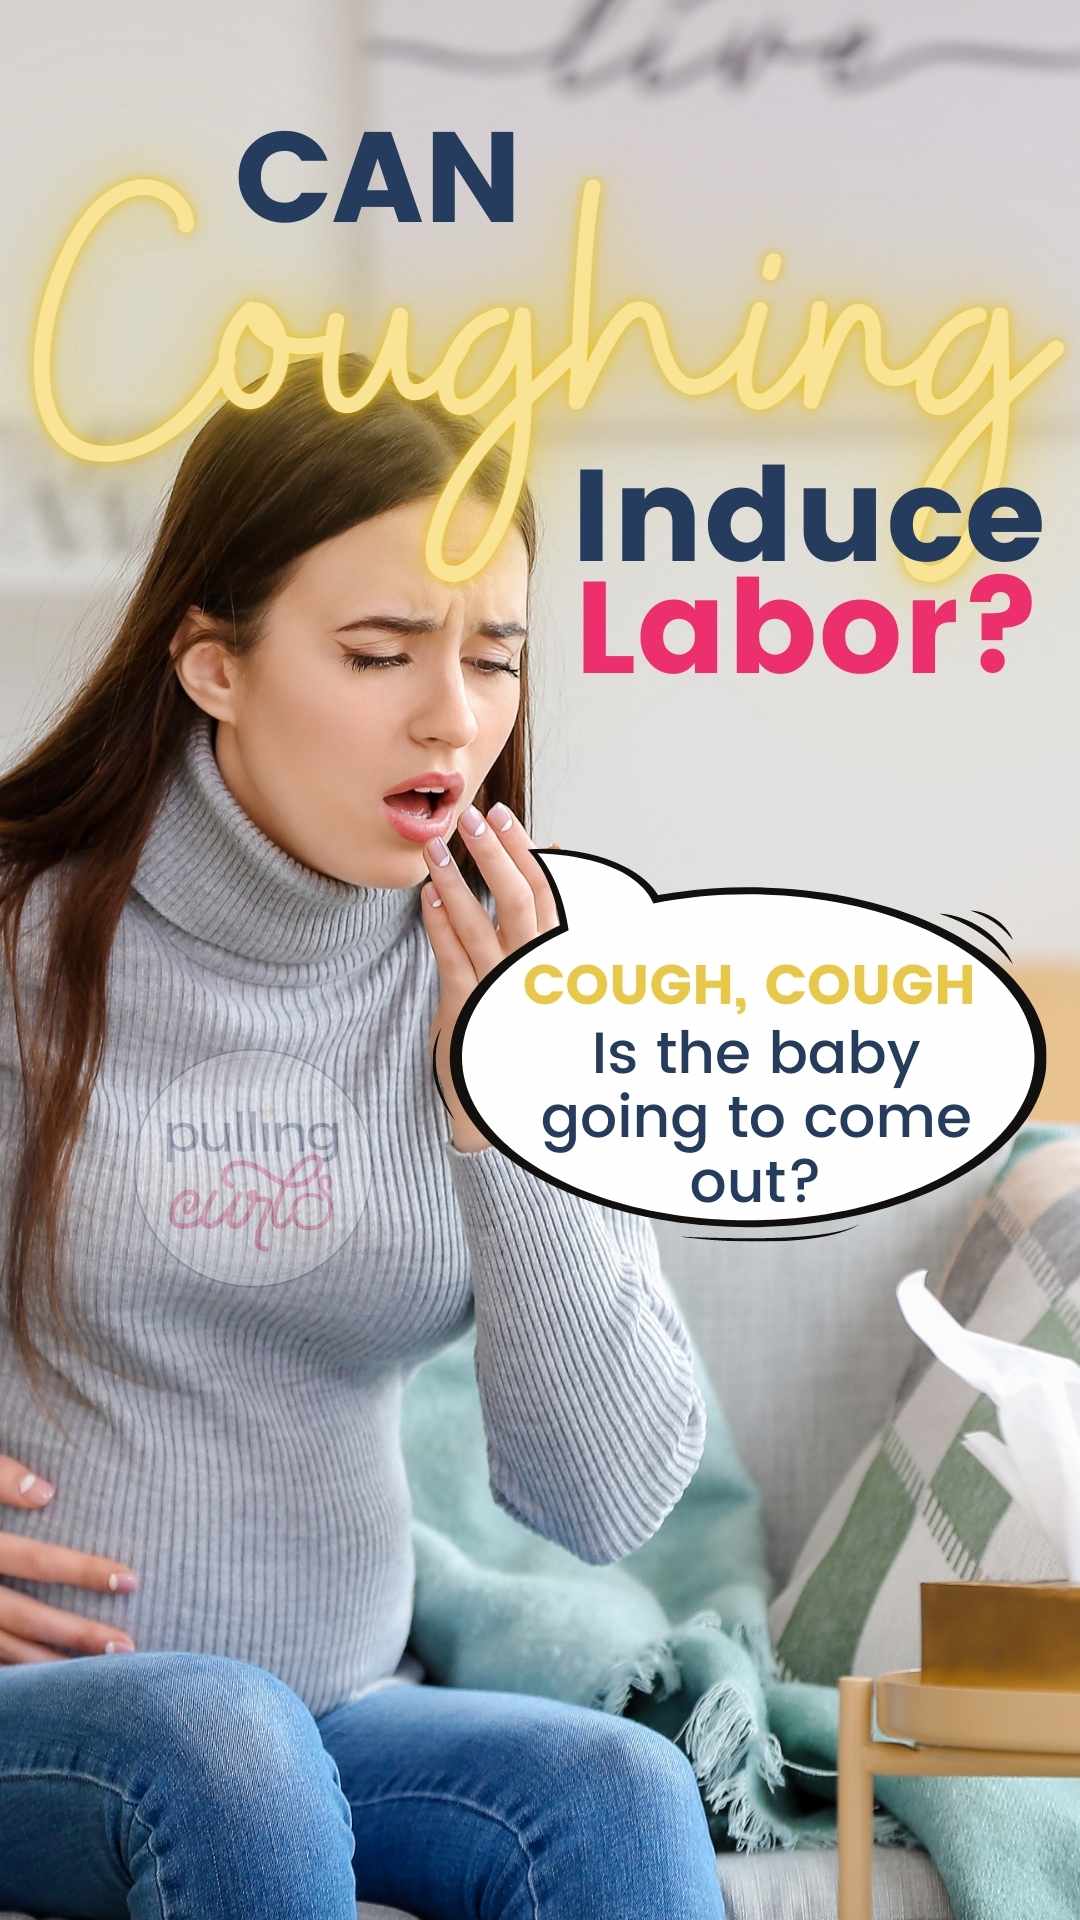 Pregnant women have a lot of concerns about their pregnancy. Coughing can really FEEL like you’re going to induce, labor. So, let’s talk about coughs in general in pregnancy and then also if they will put you into labor.